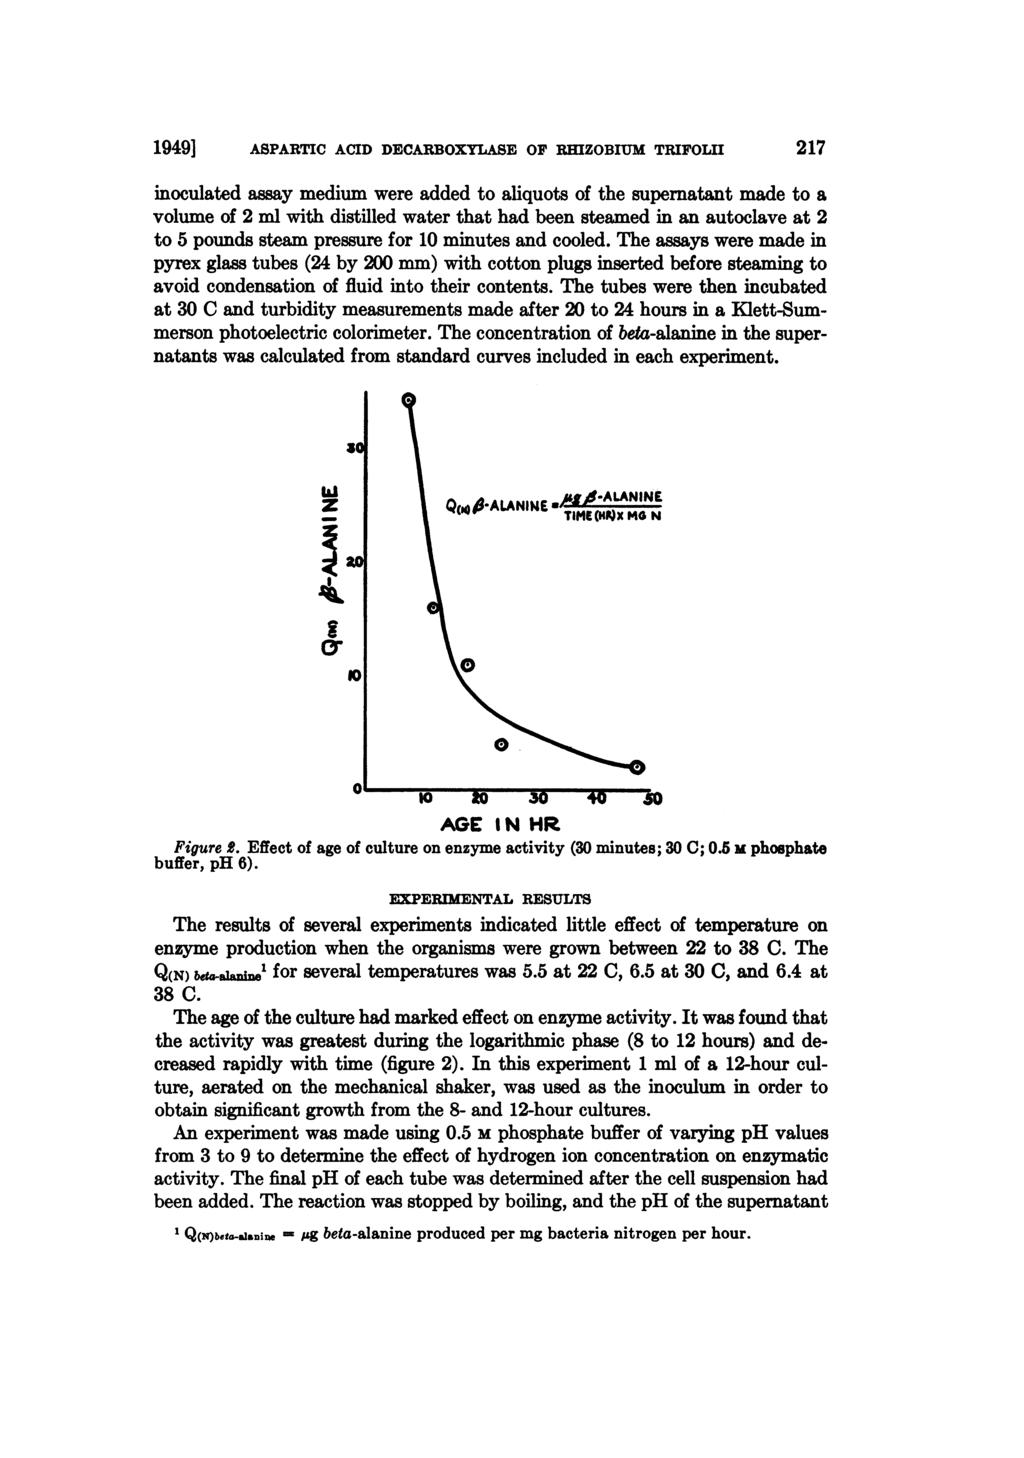 1949] ASPARTIC ACID DECARBOXYLASE OF RHIZOBIUM TRIFOL217 inoculated asay medium were added to aliquots of the supernatant made to a volume of 2 ml with distilled water that had been steamed in an